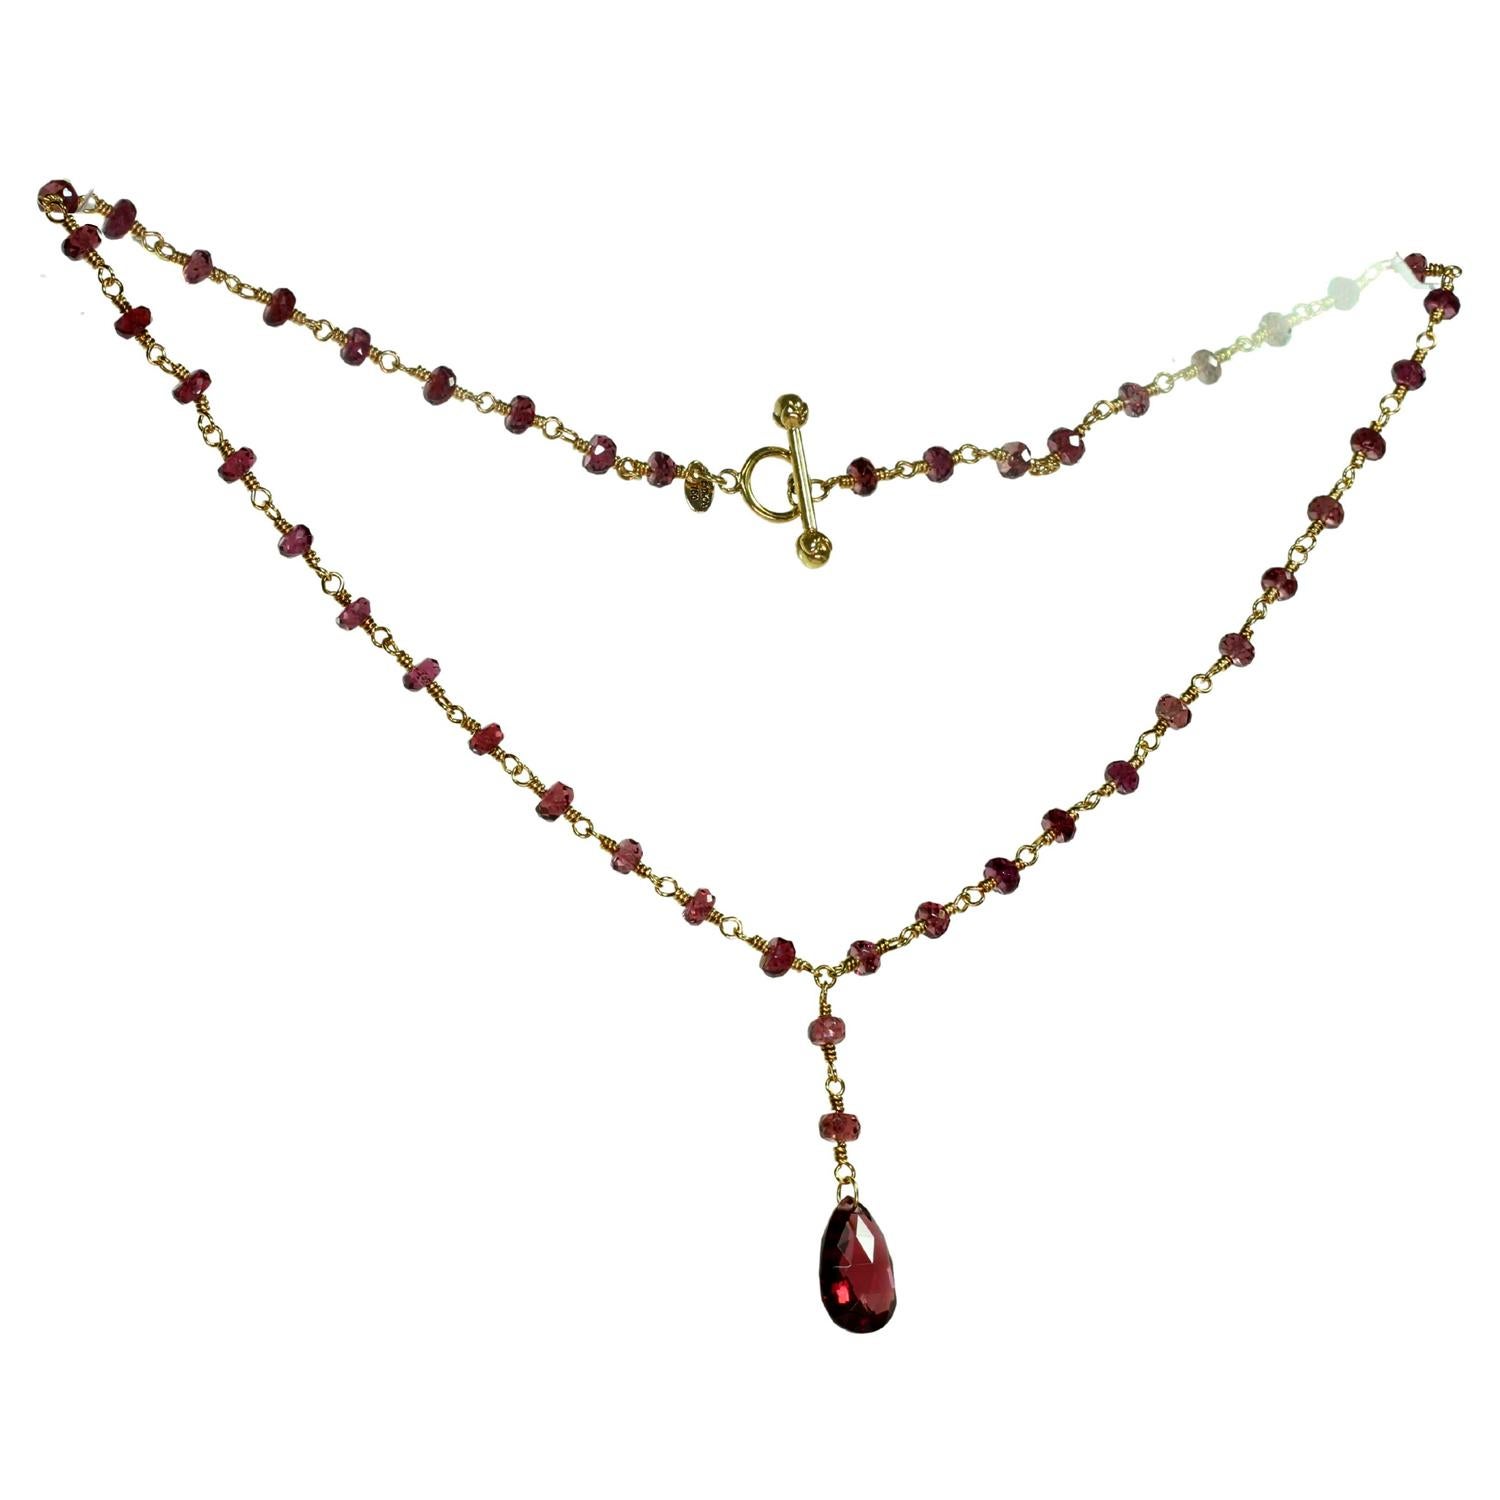 Tiffany & Co. Rhodolite Garnet Briolette Bead 18k Gold Necklace In Excellent Condition For Sale In New York, NY